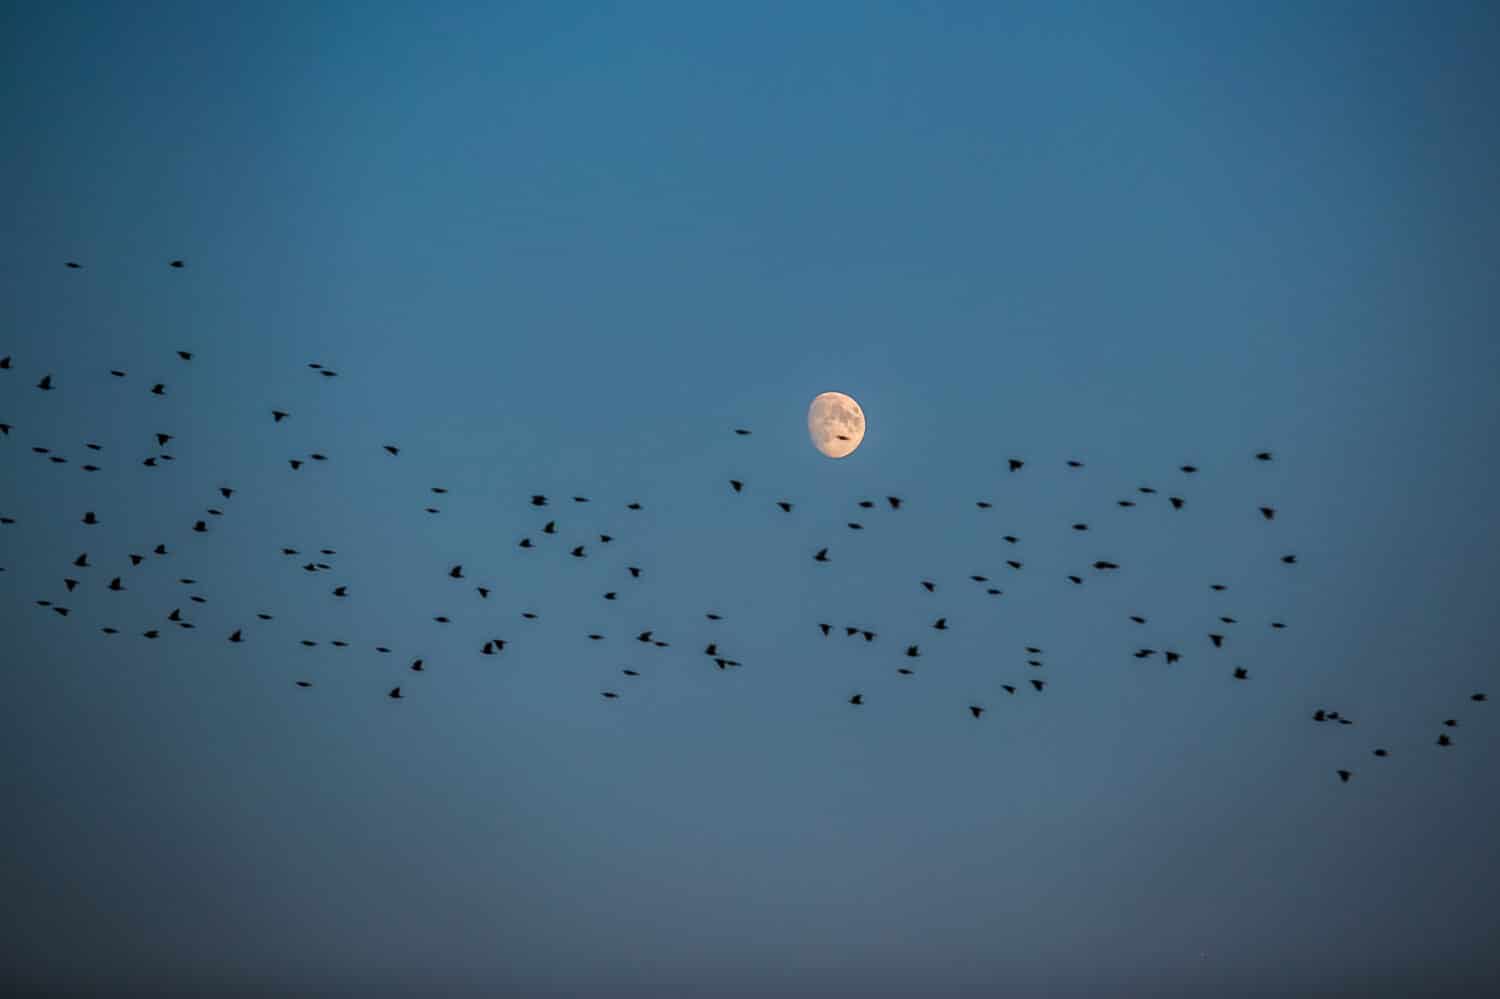 Night view of flock of starlings flying over a white moon, dark blue sky, migration of birds during autumn